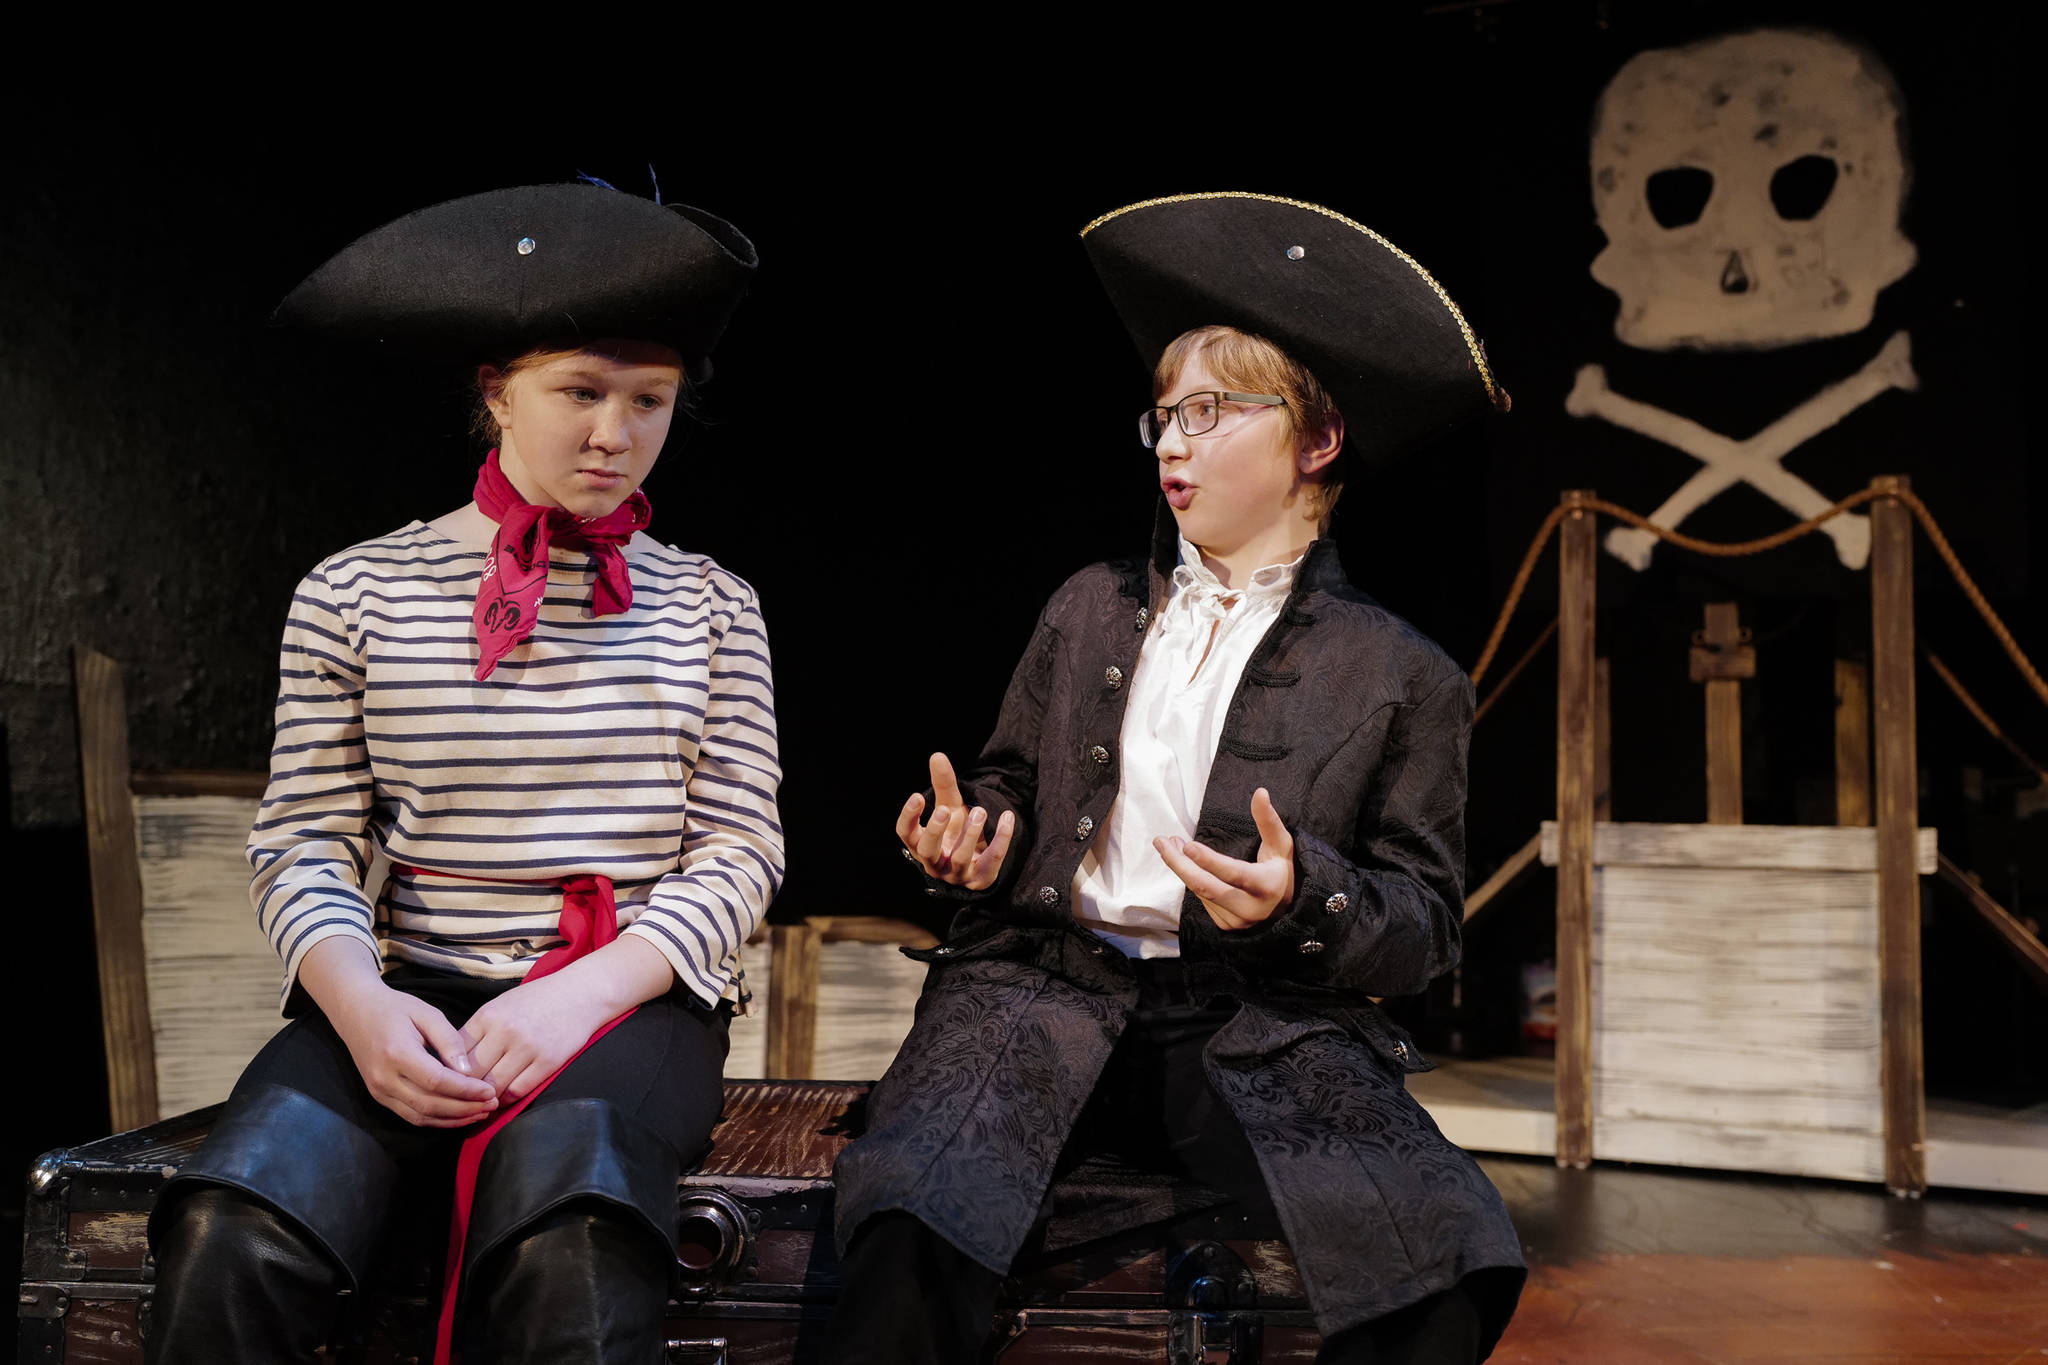 Eva Miller, left, as Neddie (Young Blackbeard) and Arlo Davis, as Captain Hornigold, rehearse the musical in Perseverance Theatre’s STAR production of the musical “Bloody Blackbeard” on Tuesday, July 16, 2019. (Michael Penn | Juneau Empire)